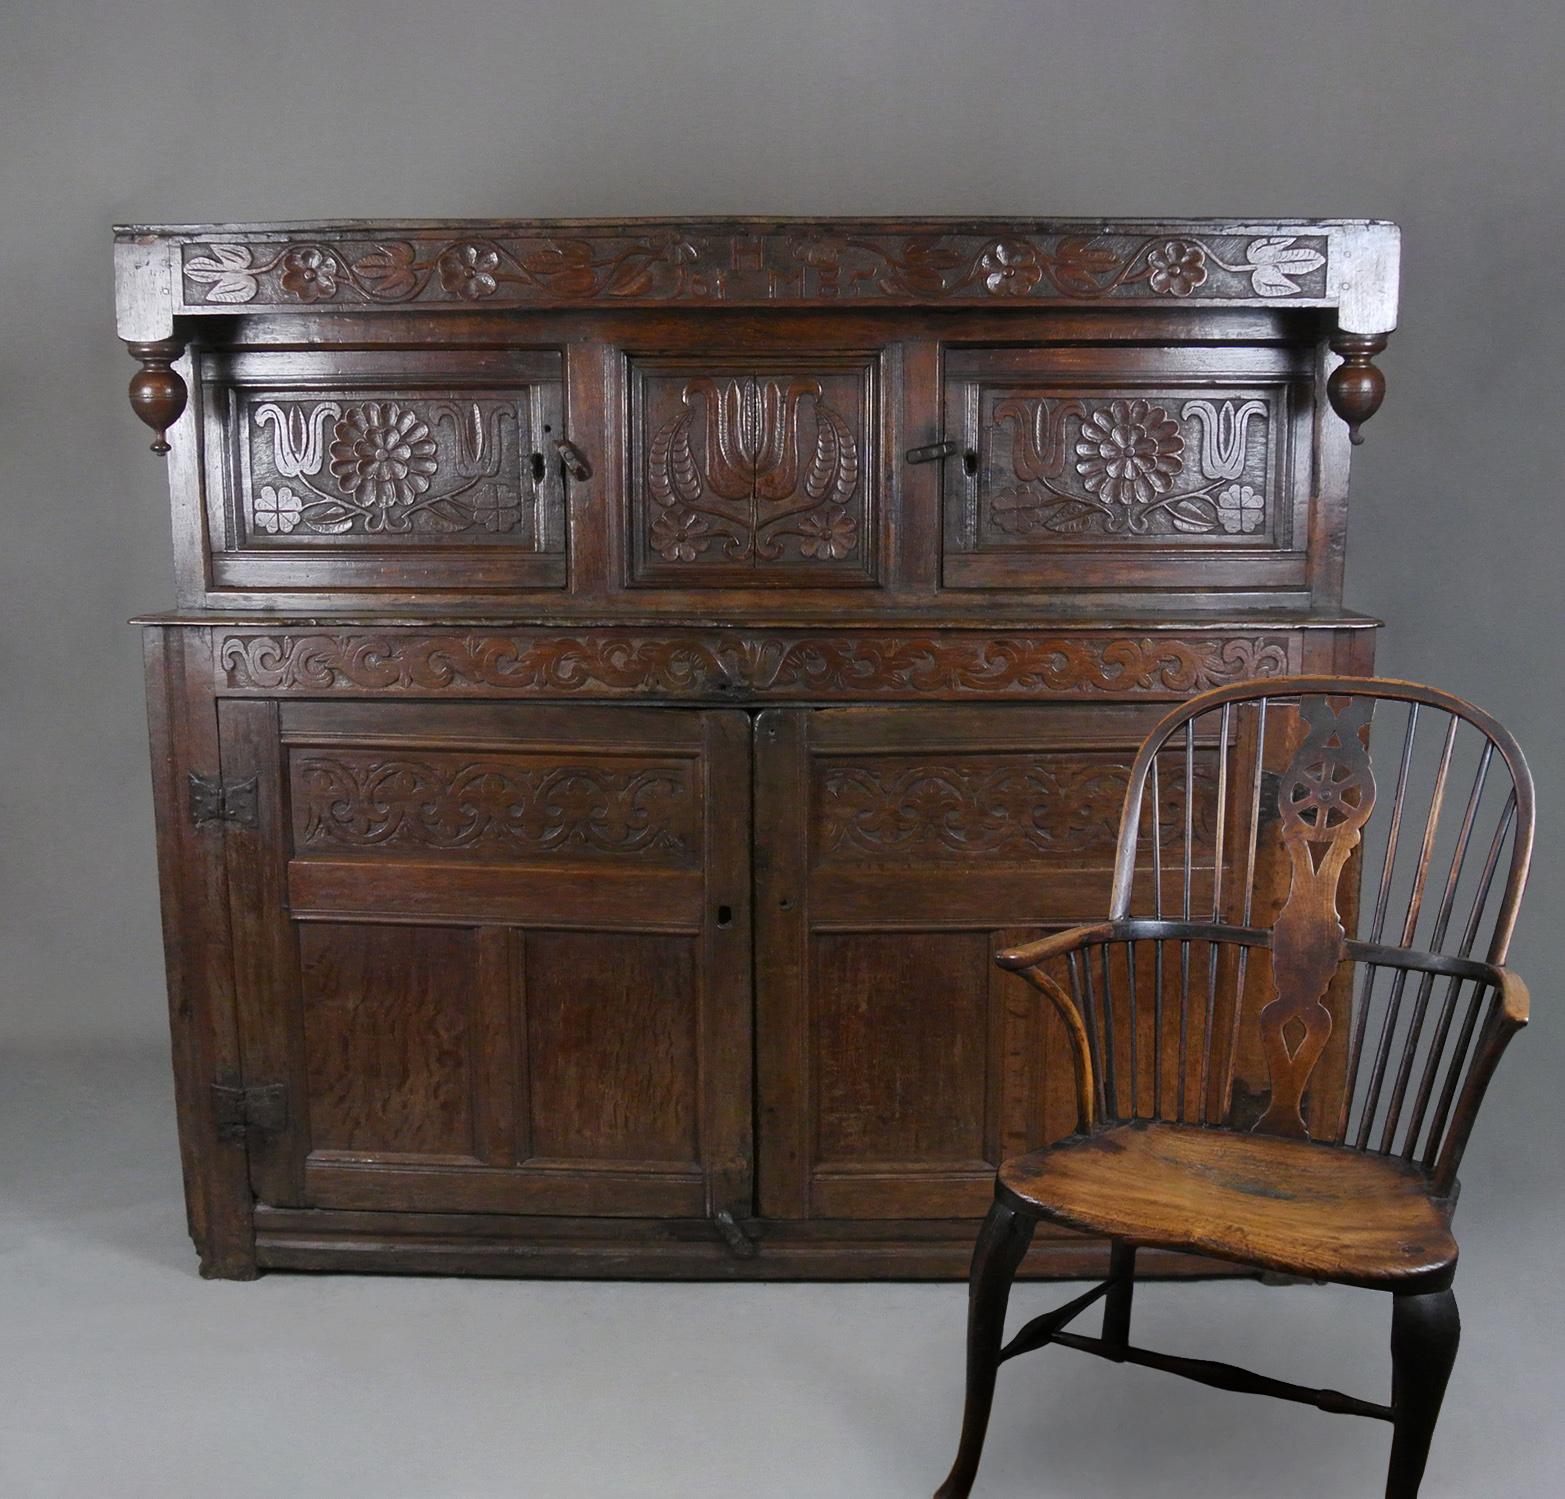 A very beautiful 17th century oak court cupboard of excellent proportions, perfect for a cottage as it stands at only 58.75 inches high, and retains its original oak boards throughout and has an excellent colour and natural patination.

The